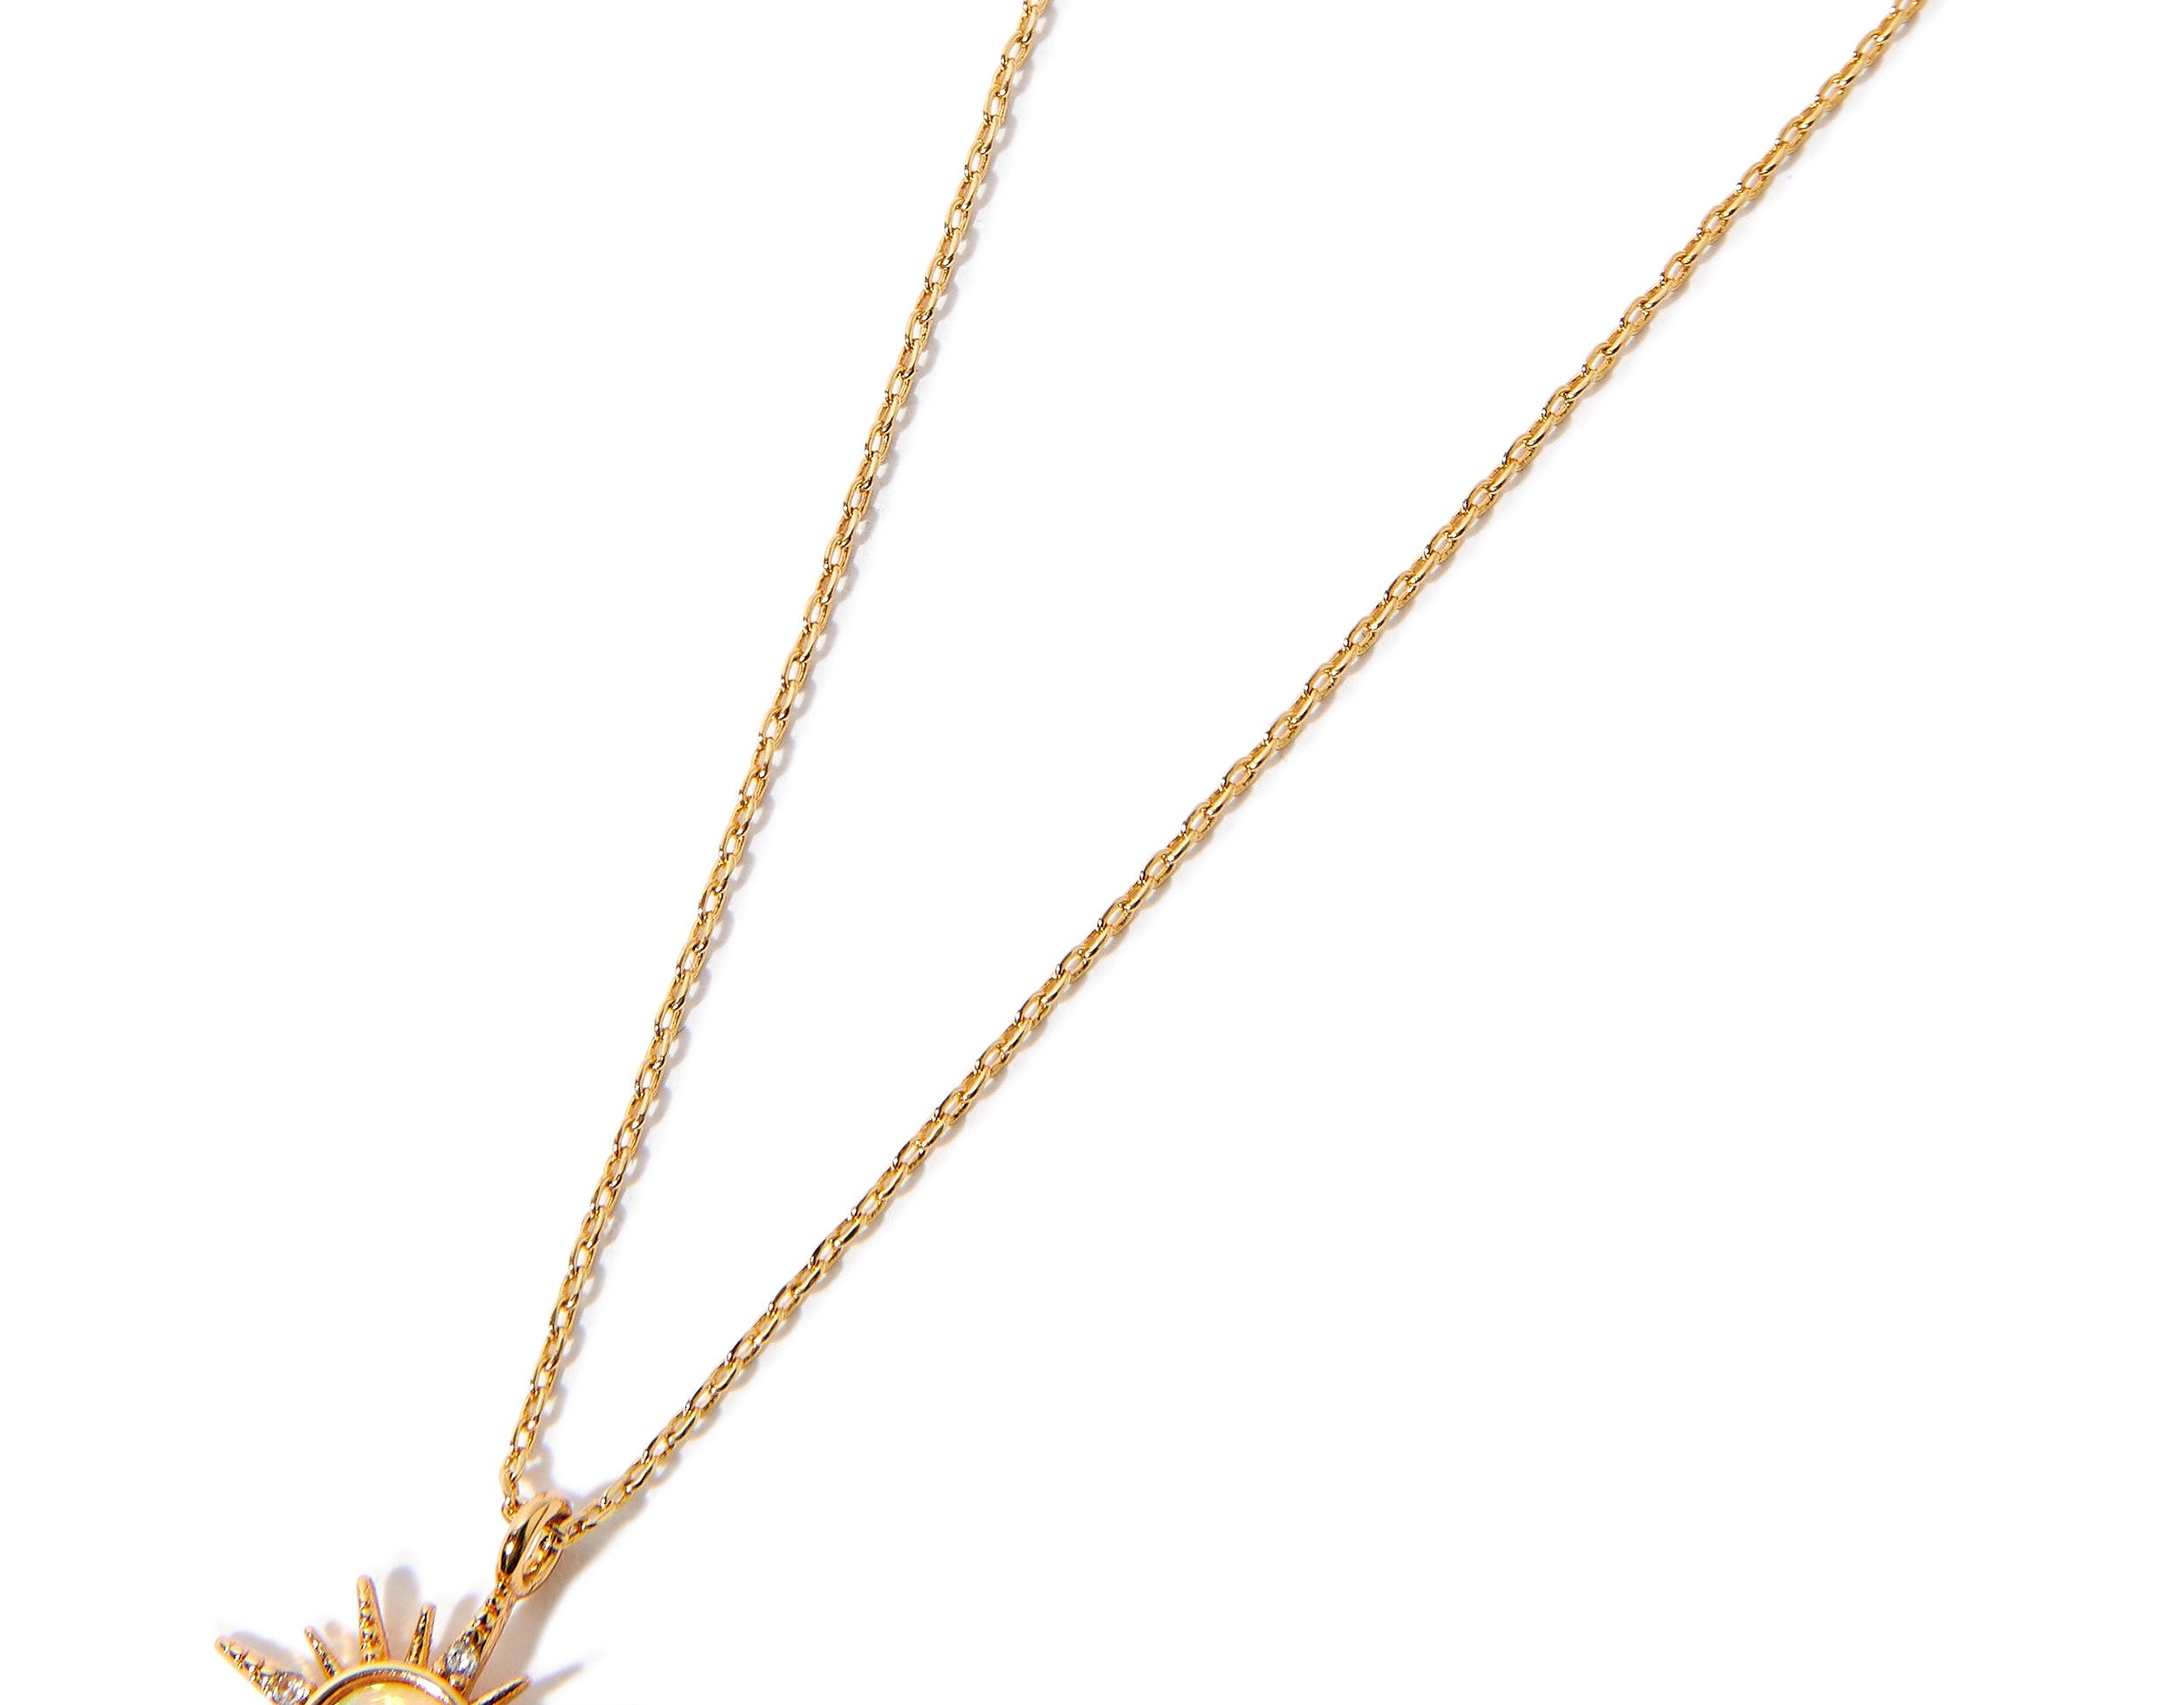 Real Gold Plated Opal Starburst Pendant Necklace For Women By Accessorize London